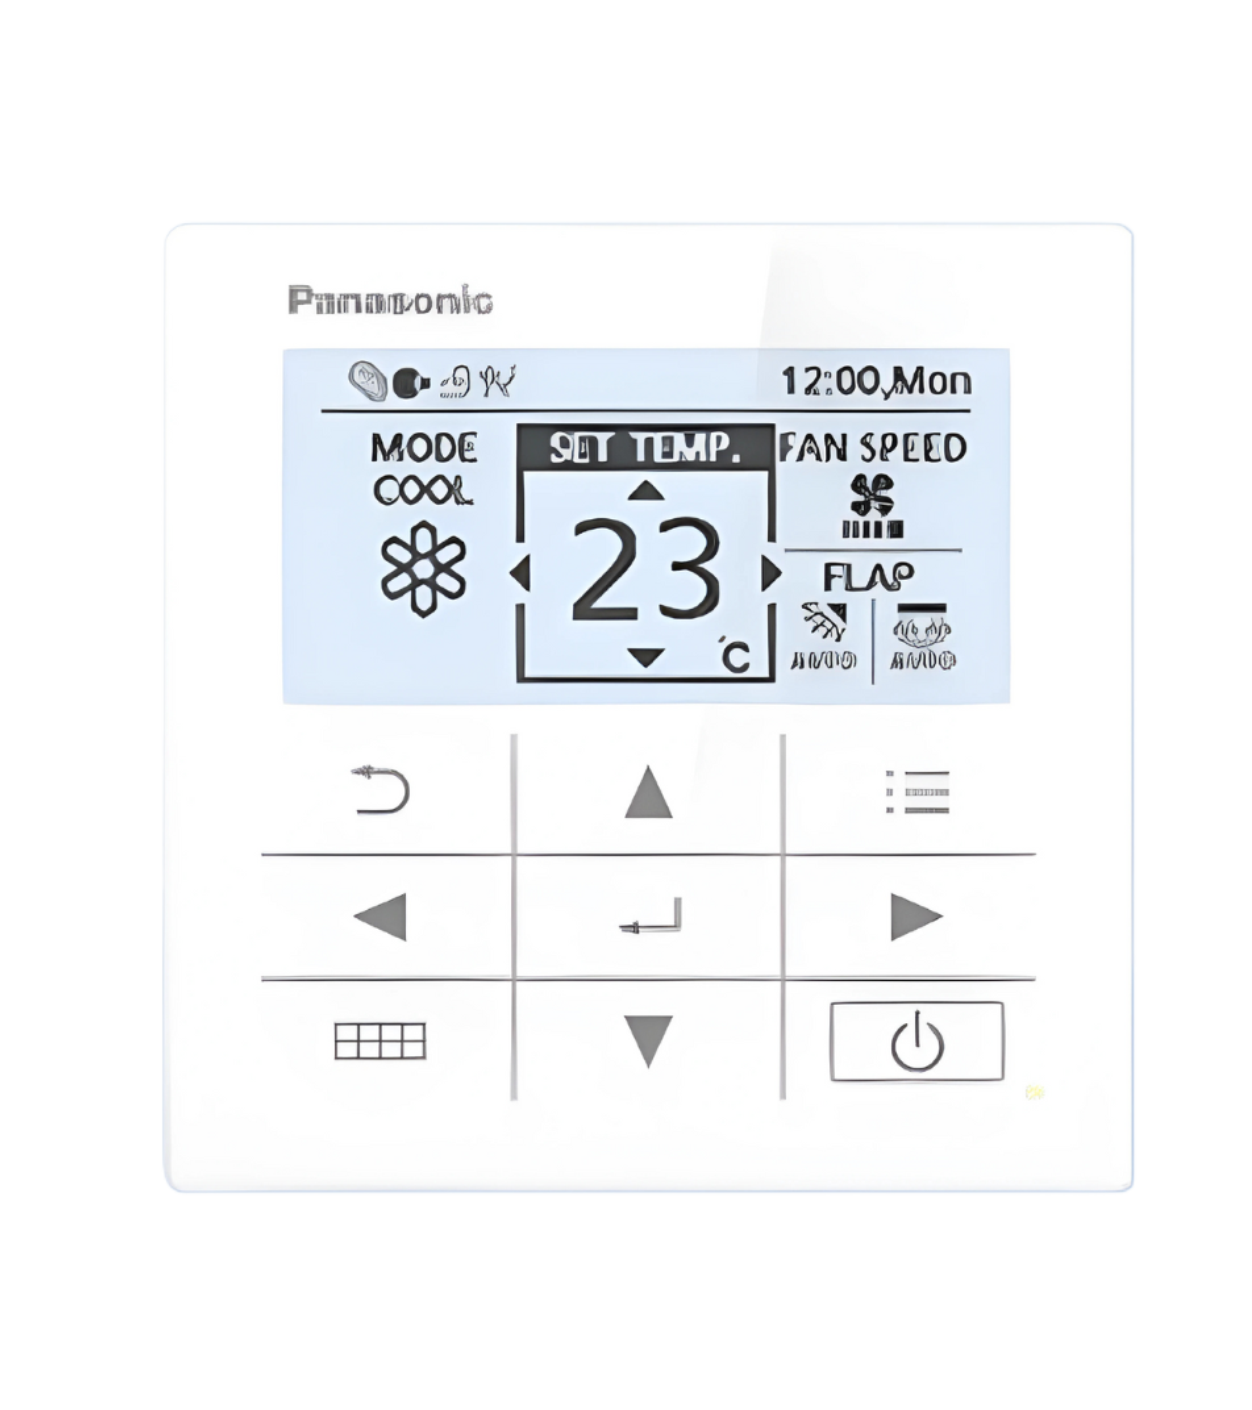 a remote control for a panasonic air conditioner shows the temperature and fan speed .